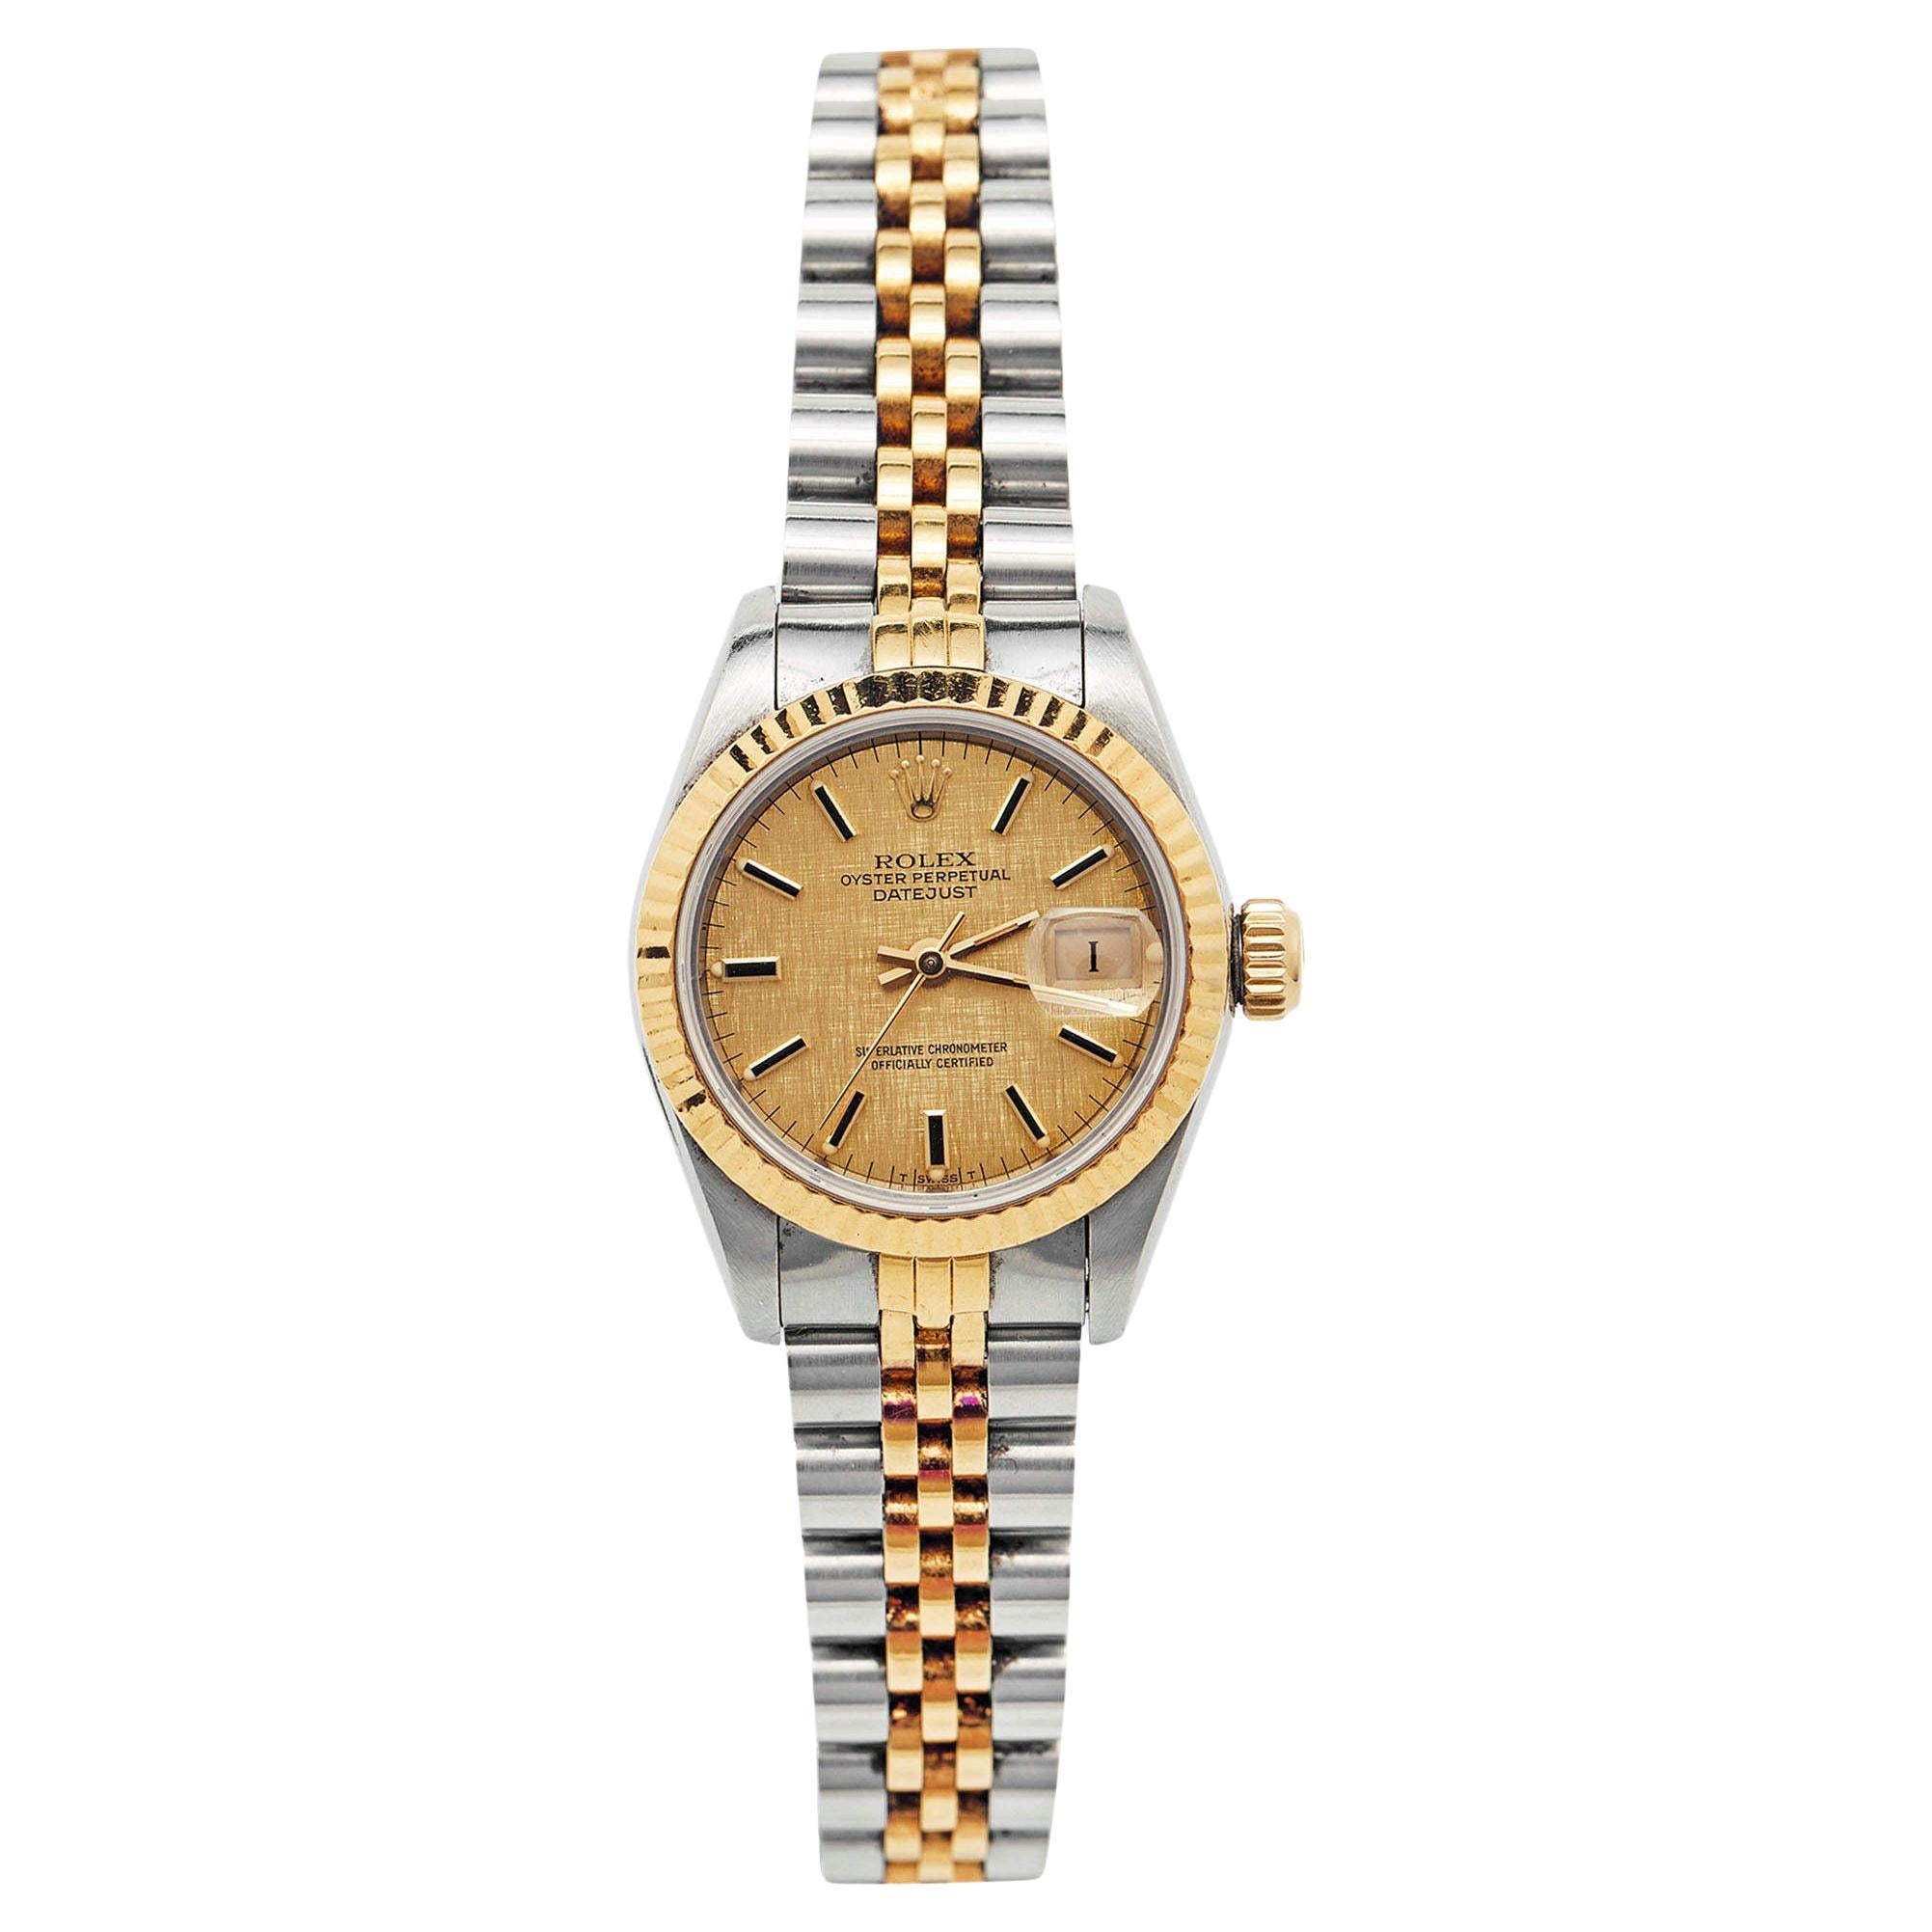 Rolex 18K Yellow Gold And Stainless Steel Datejust Women's Wristwatch 26 mm